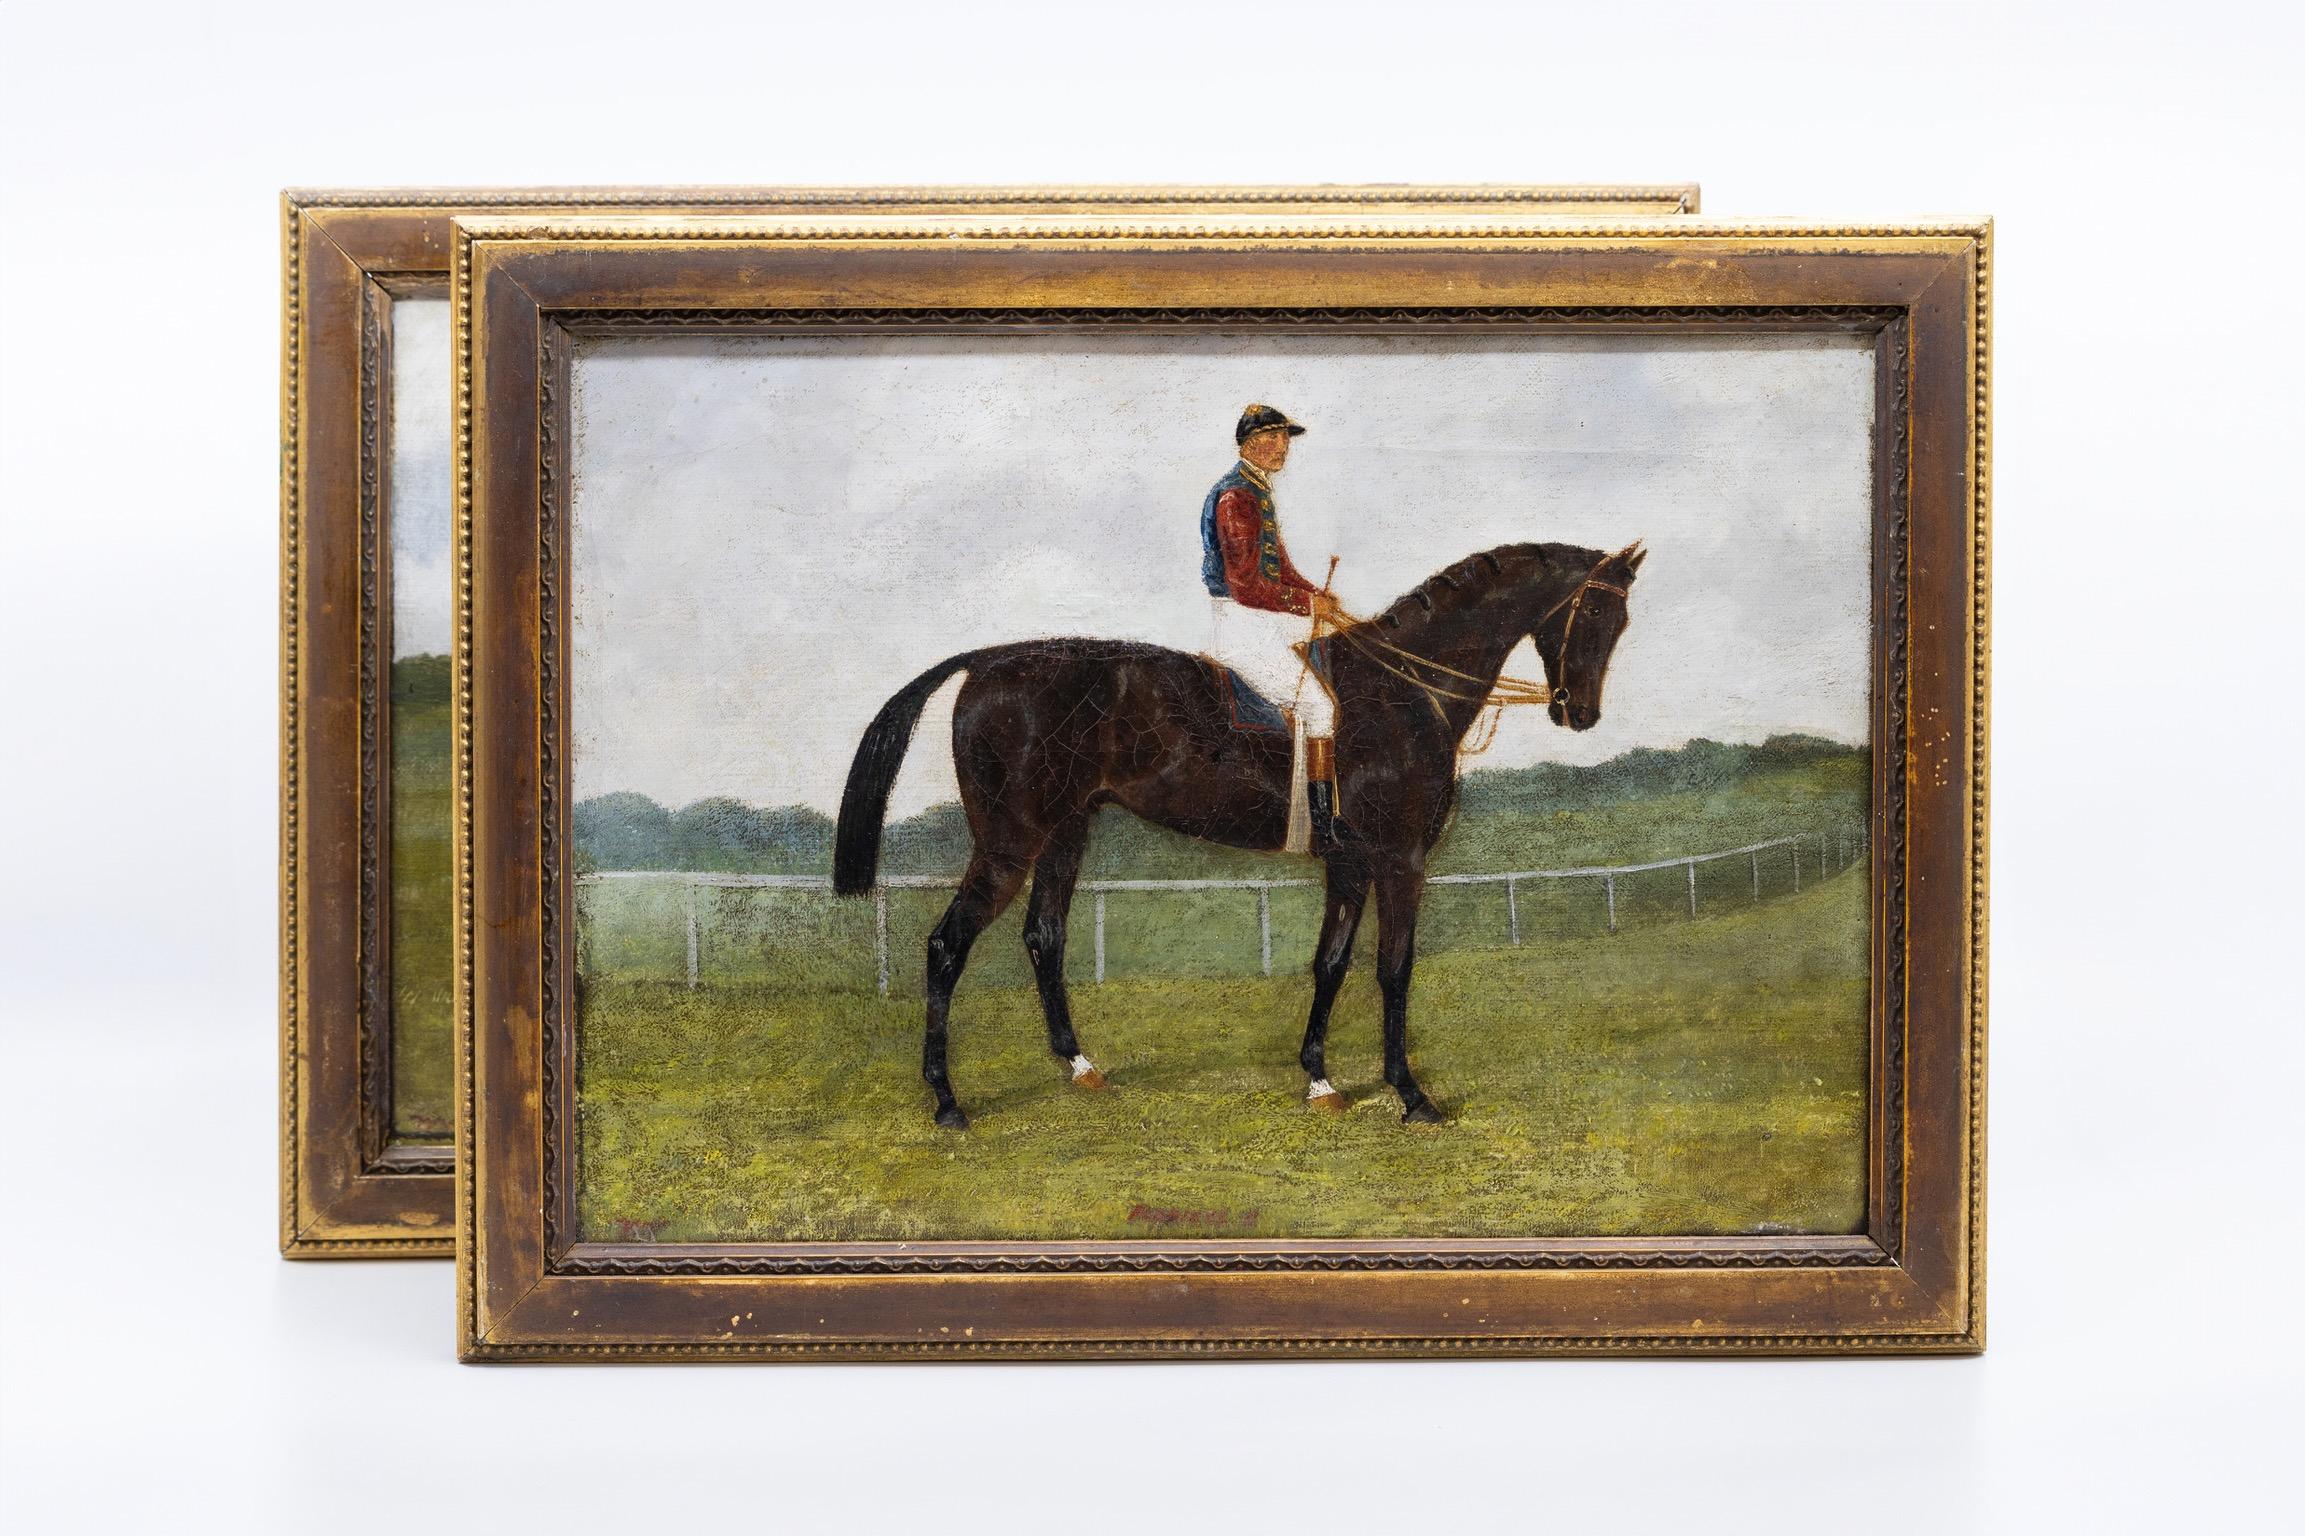 A charming pair of early 19th century horse paintings! Each painting depicts a Jockey on his horse. The Jockeys are dressed in colorful uniforms. Delightful trees in the background, and a fence runs along in the background. Signed. Beautiful old